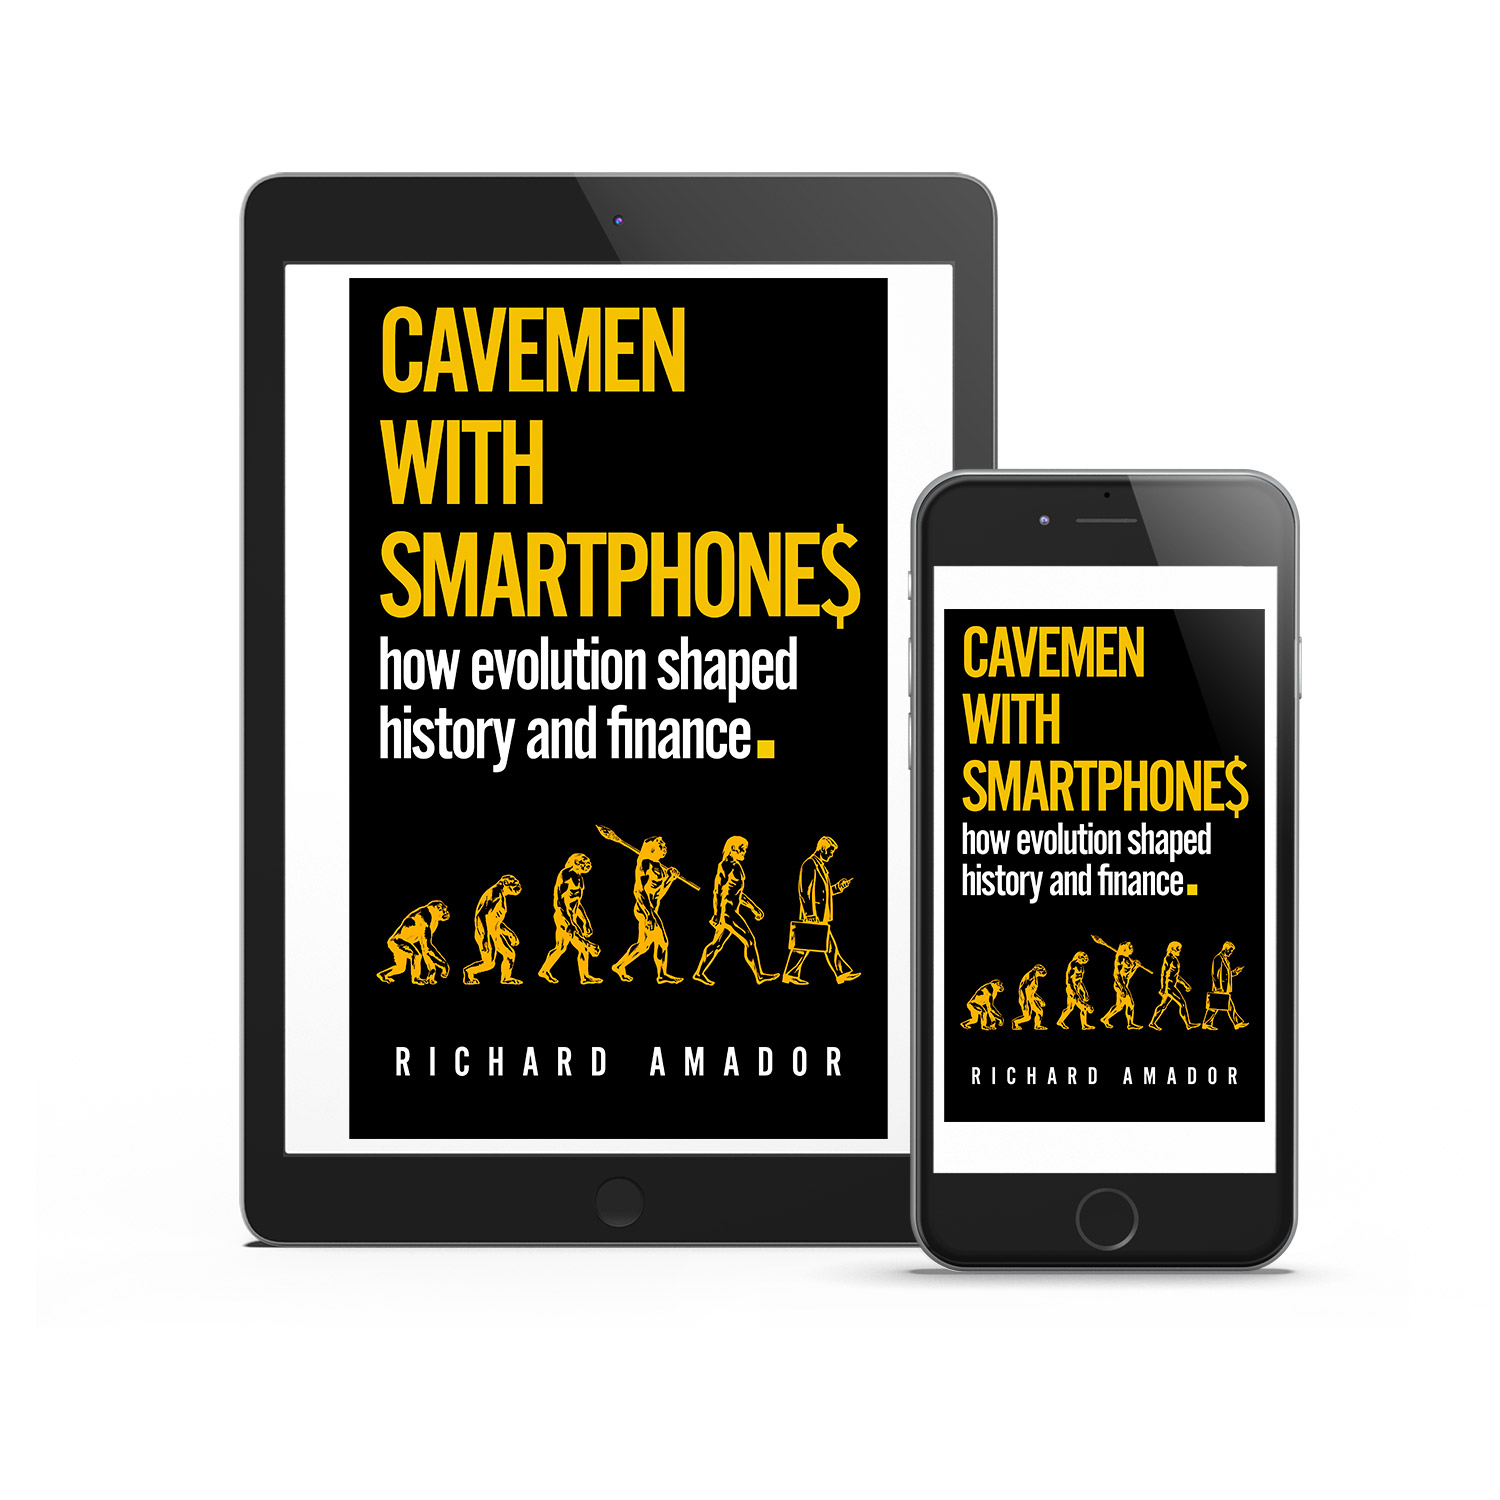 'Cavemen With Smartphones' is tongue-in-cheek meditation on the links between evolution, history and finance. The author is Richard Amador. The book cover & interior design is by Mark Thomas. To learn more about what Mark could do for your book, please visit coverness.com.